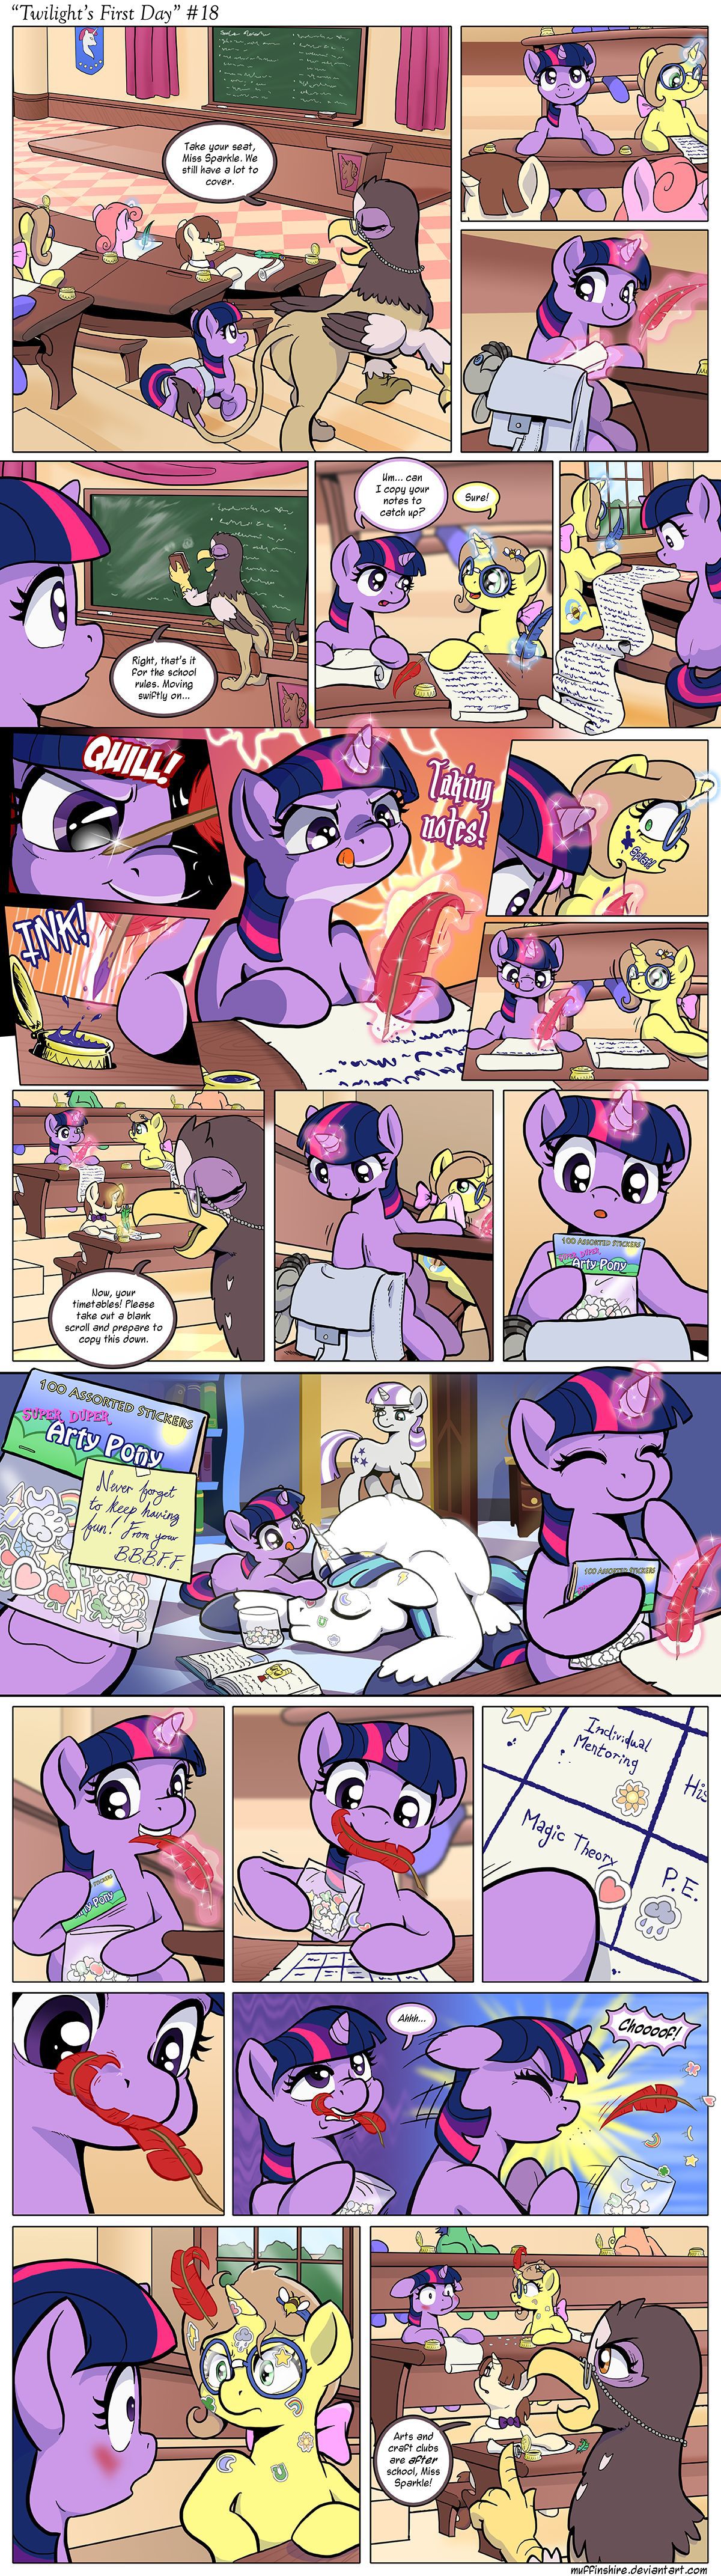 [Muffinshire] Twilight's First Day (My Little Pony: Friendship is Magic) [English] 18